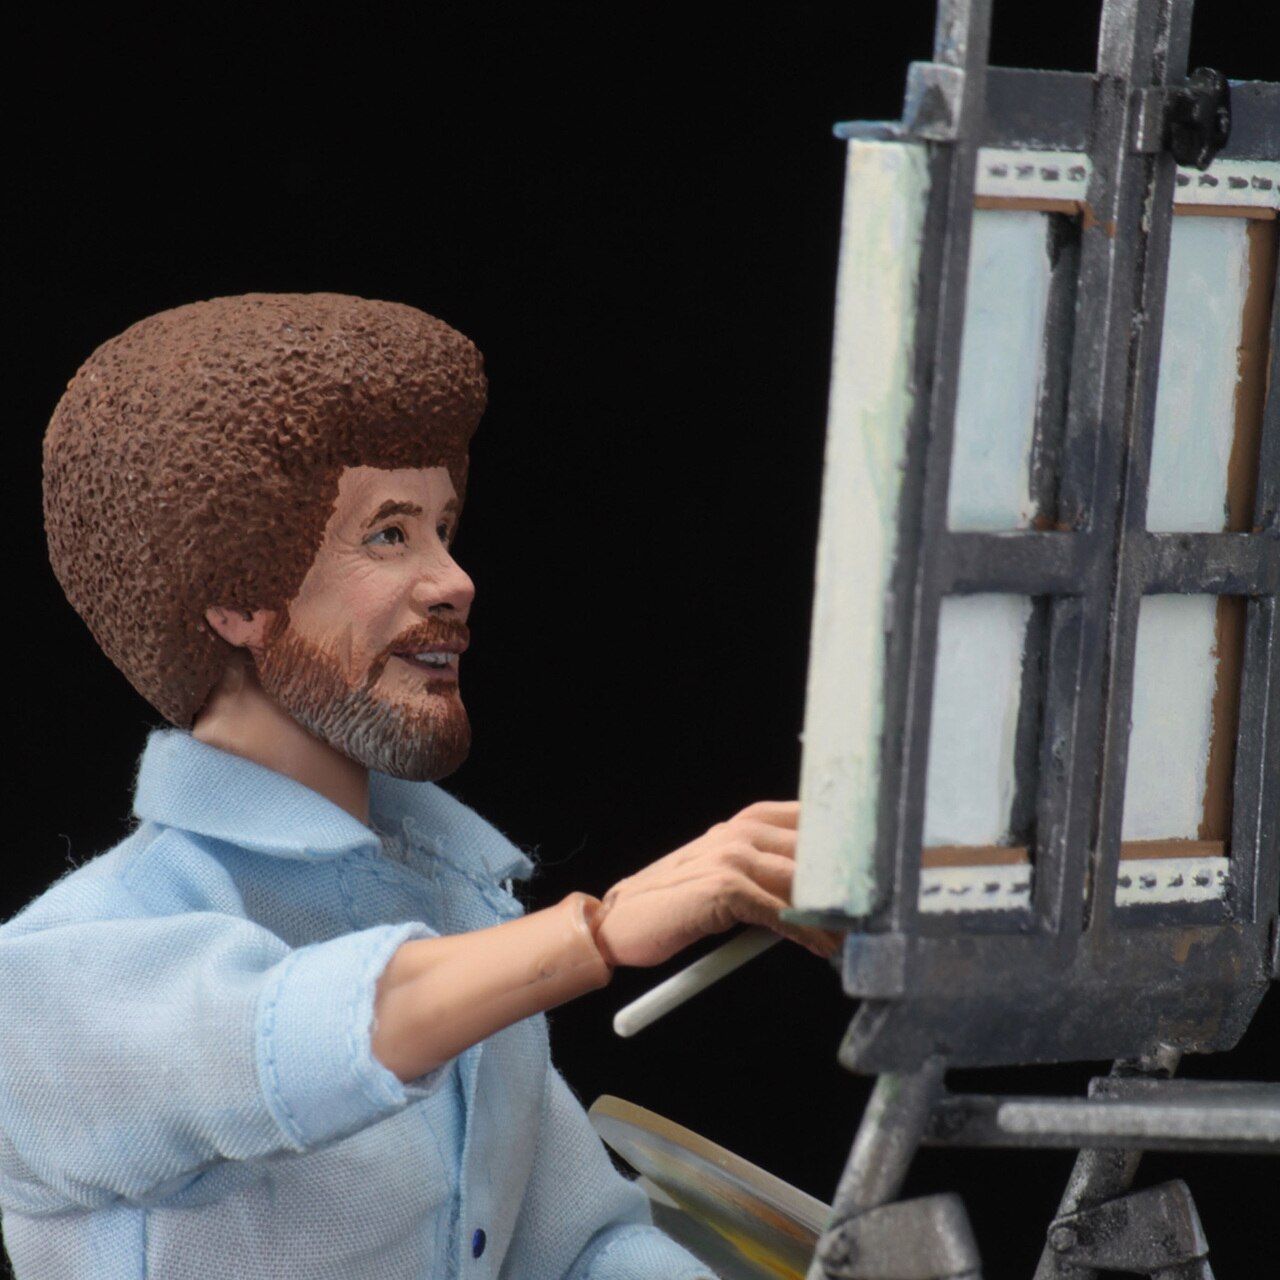 NECA - Bob Ross Clothed 8" Tall Action Figure